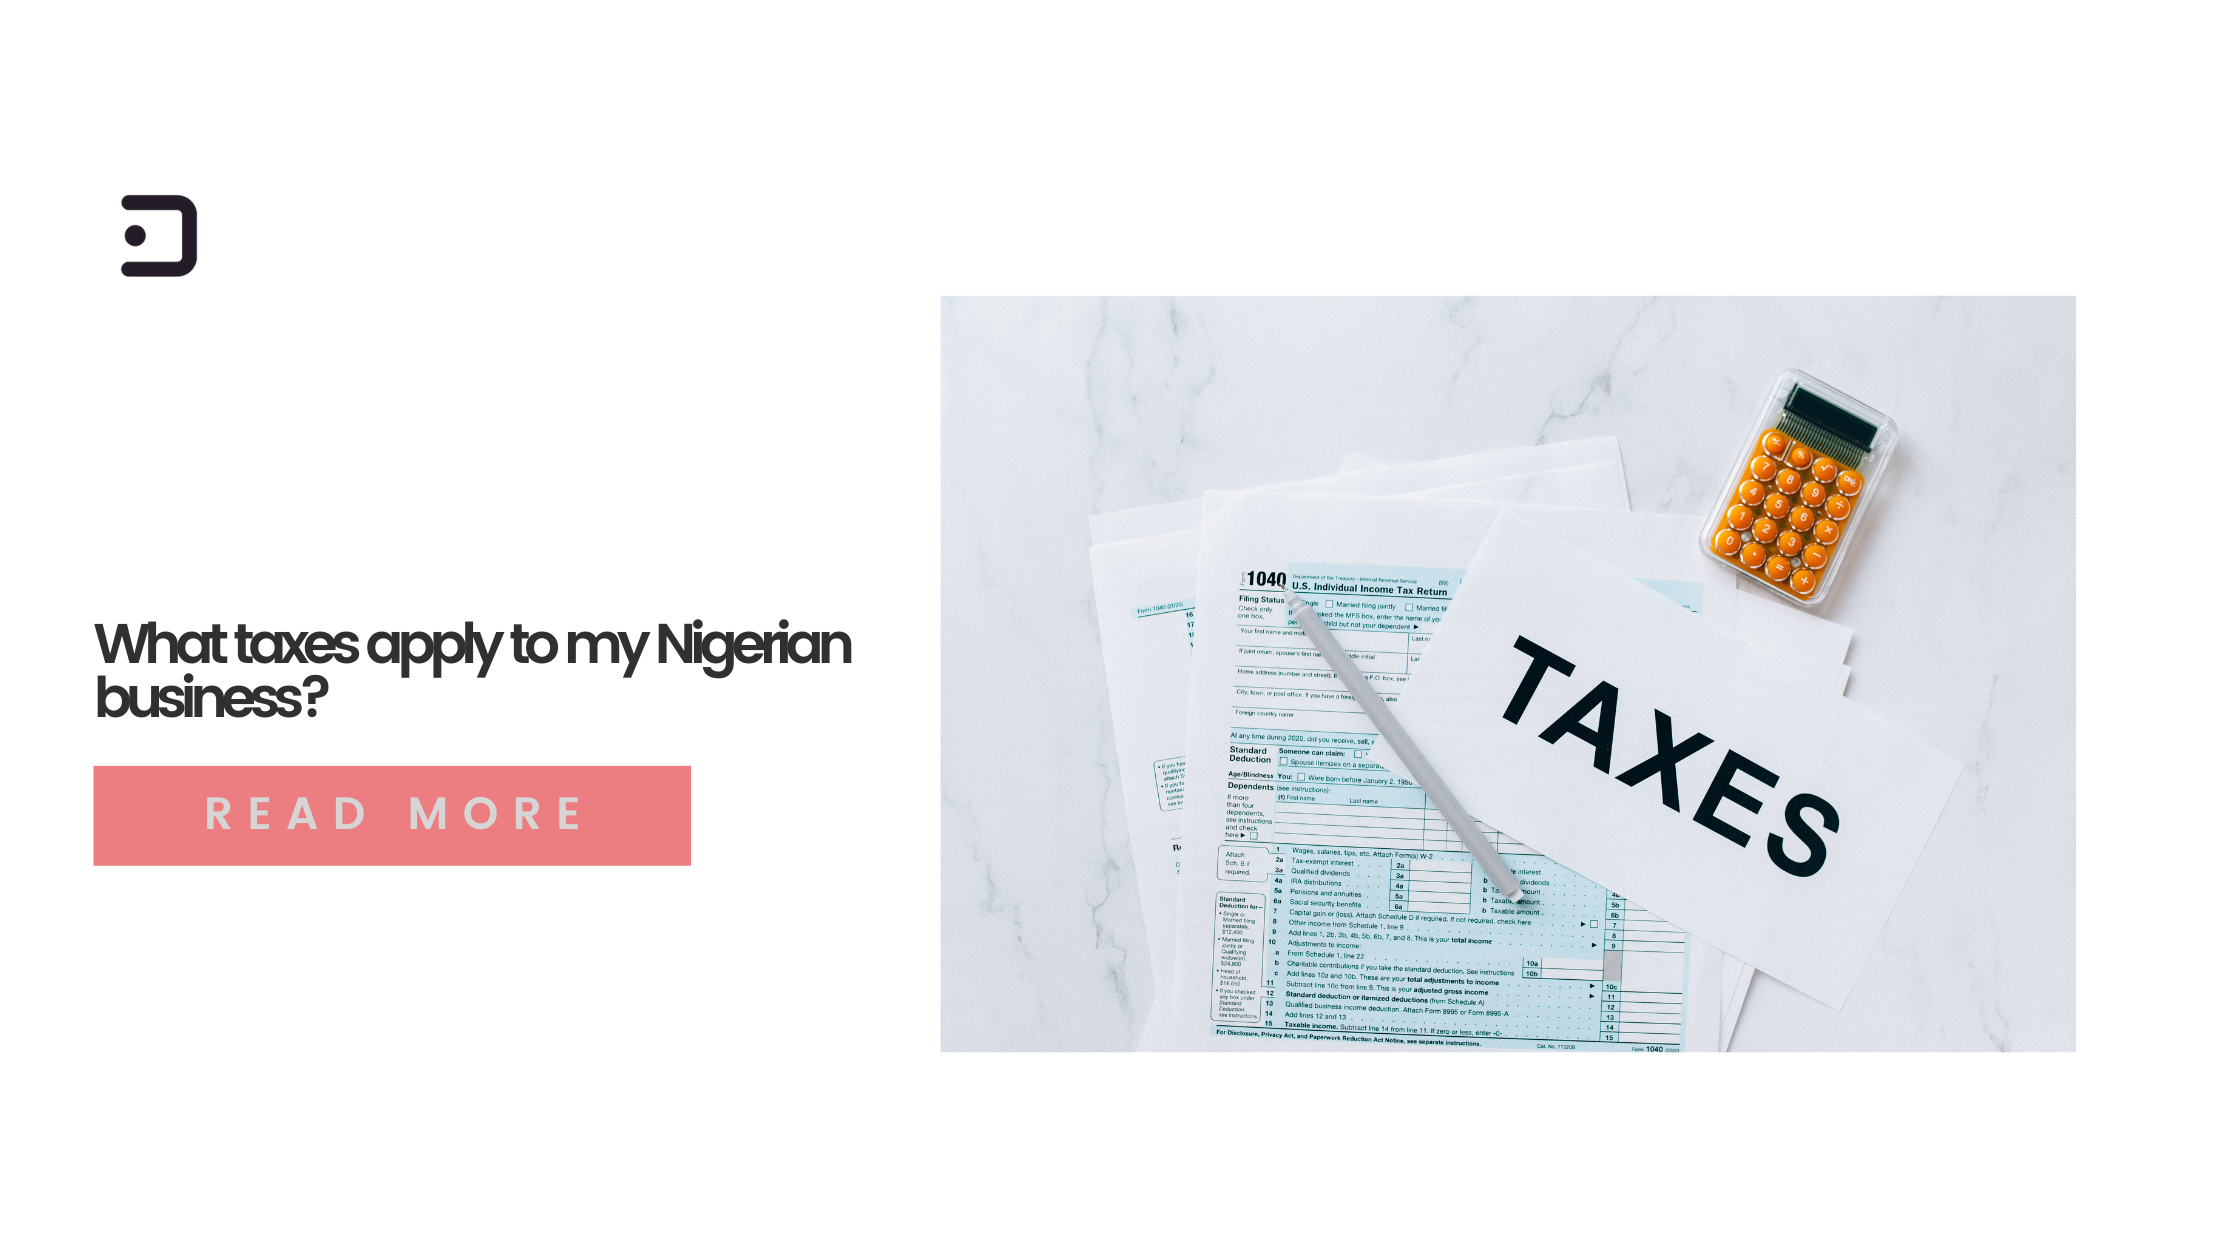 What taxes apply to my Nigerian business?